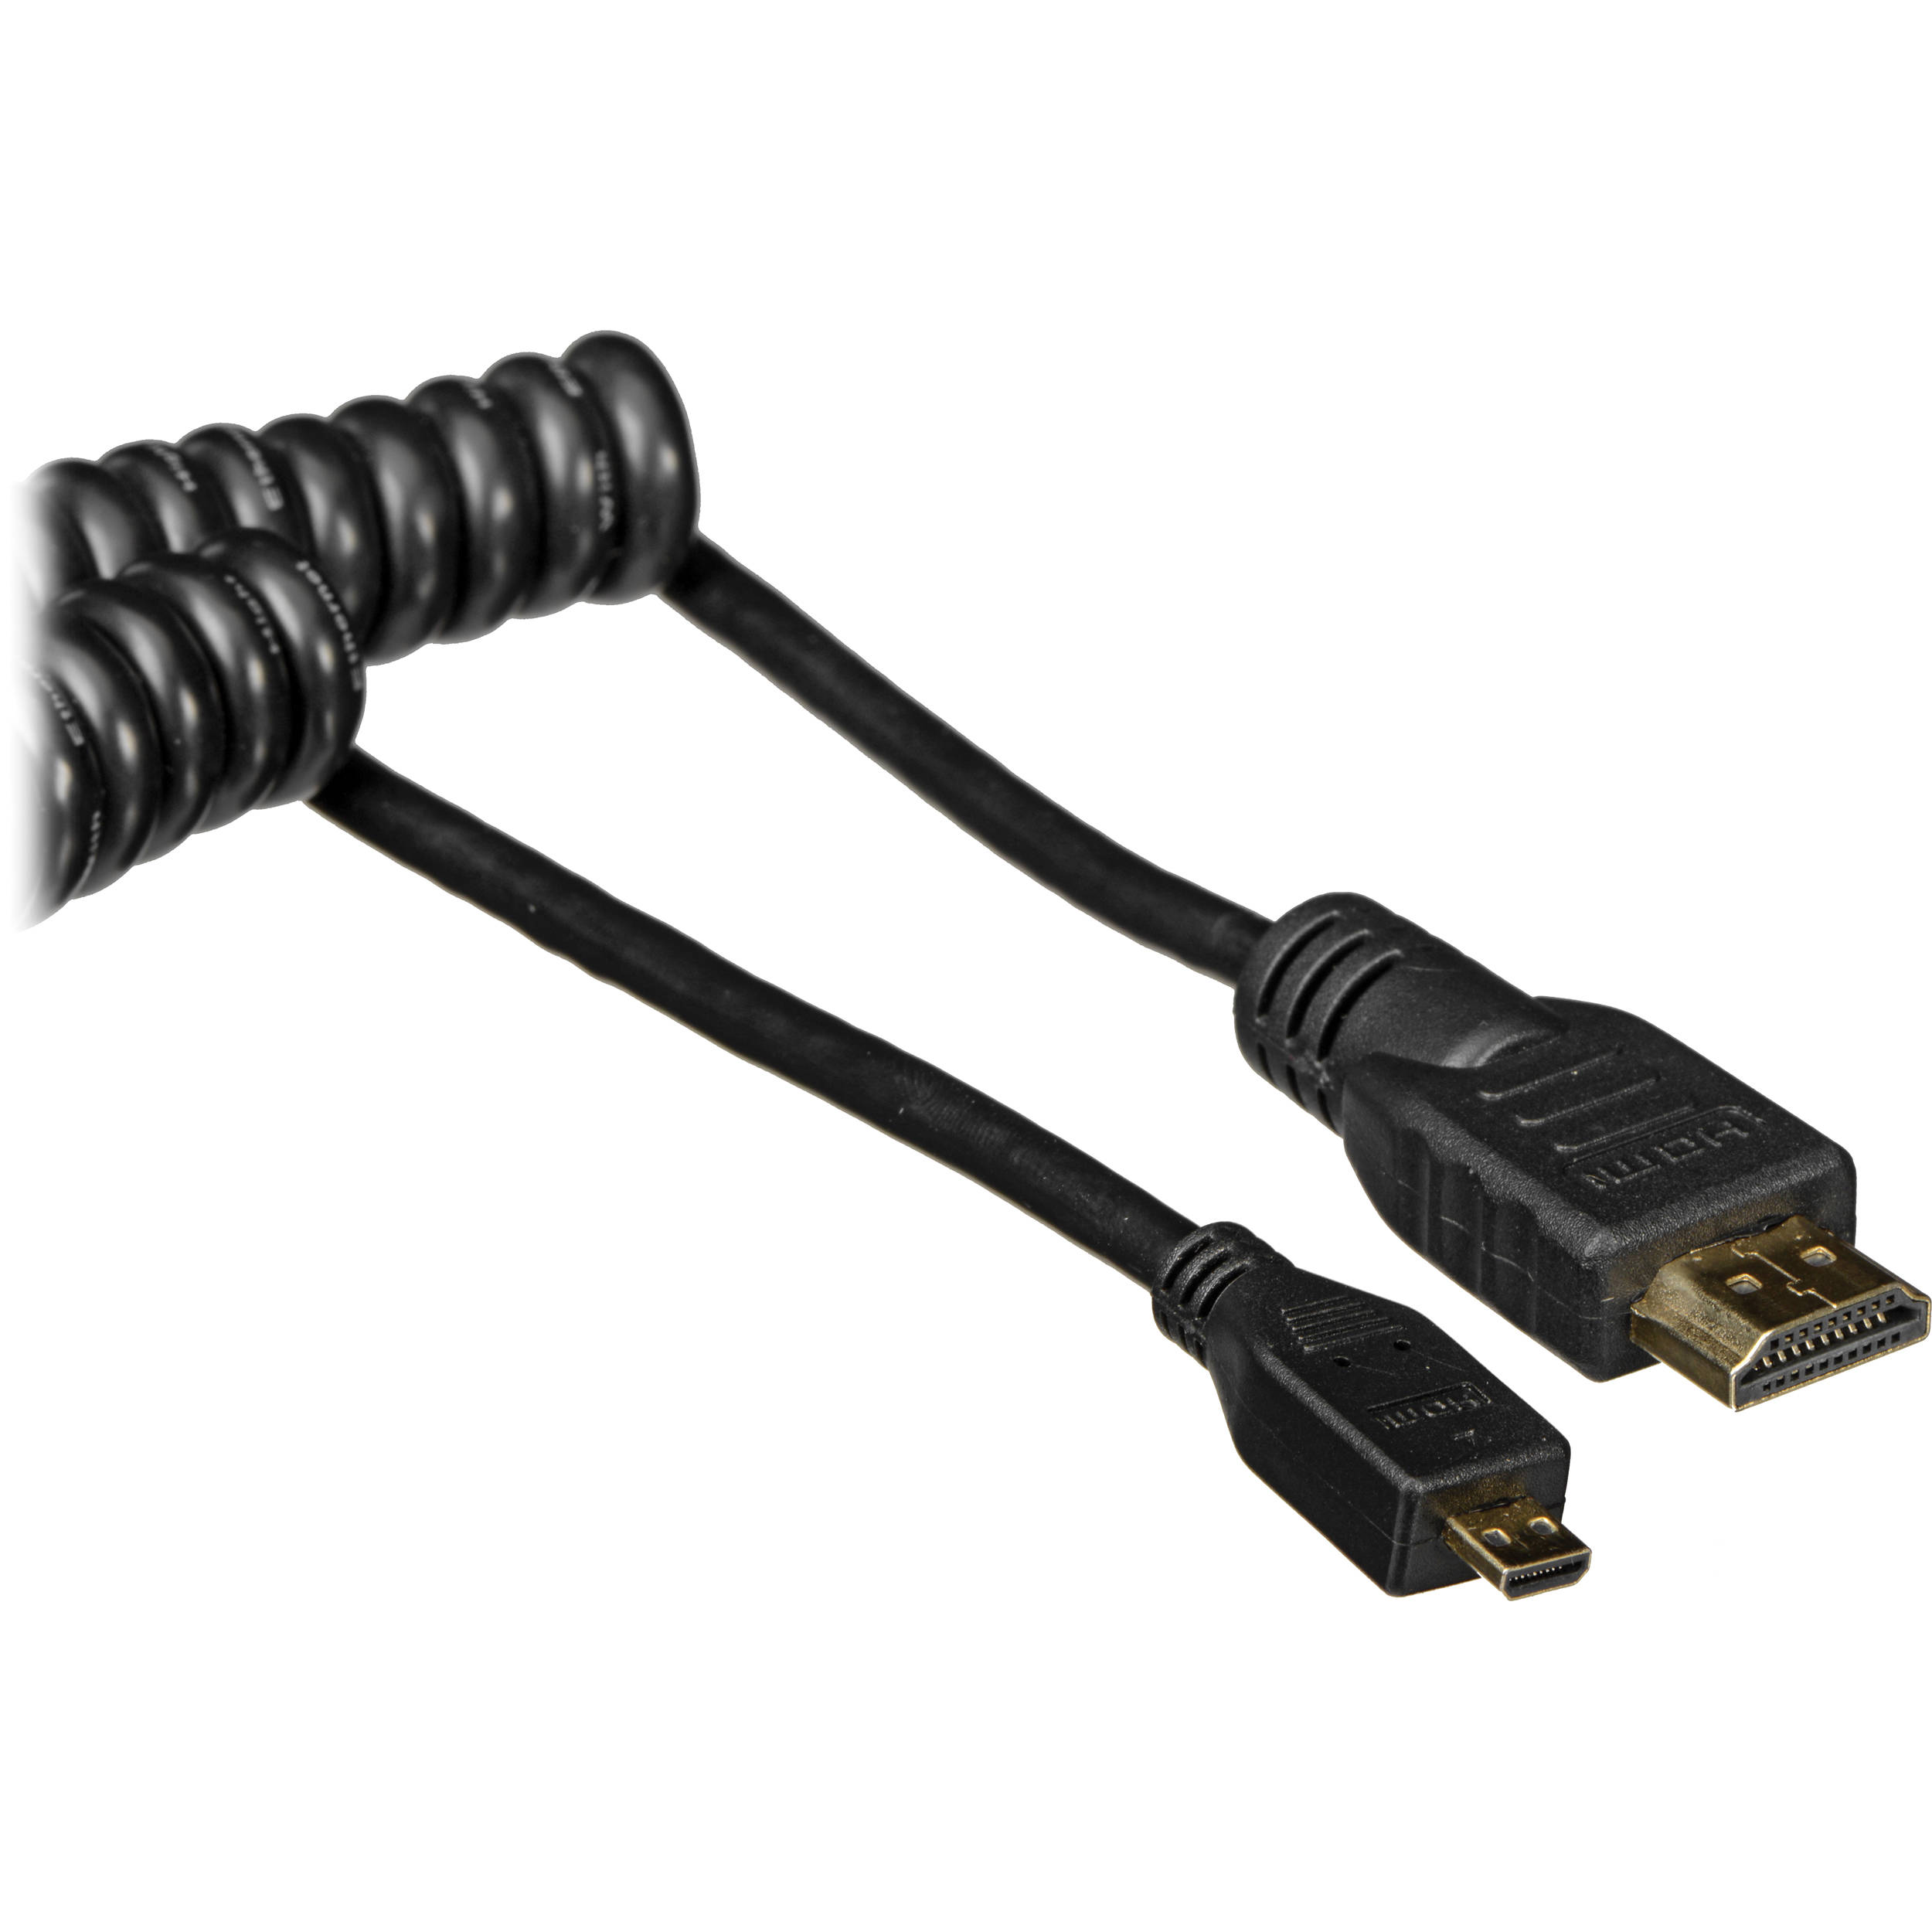 Atomos Micro Hdmi Cable Sale Online, UP TO 51% OFF | www.realliganaval.com